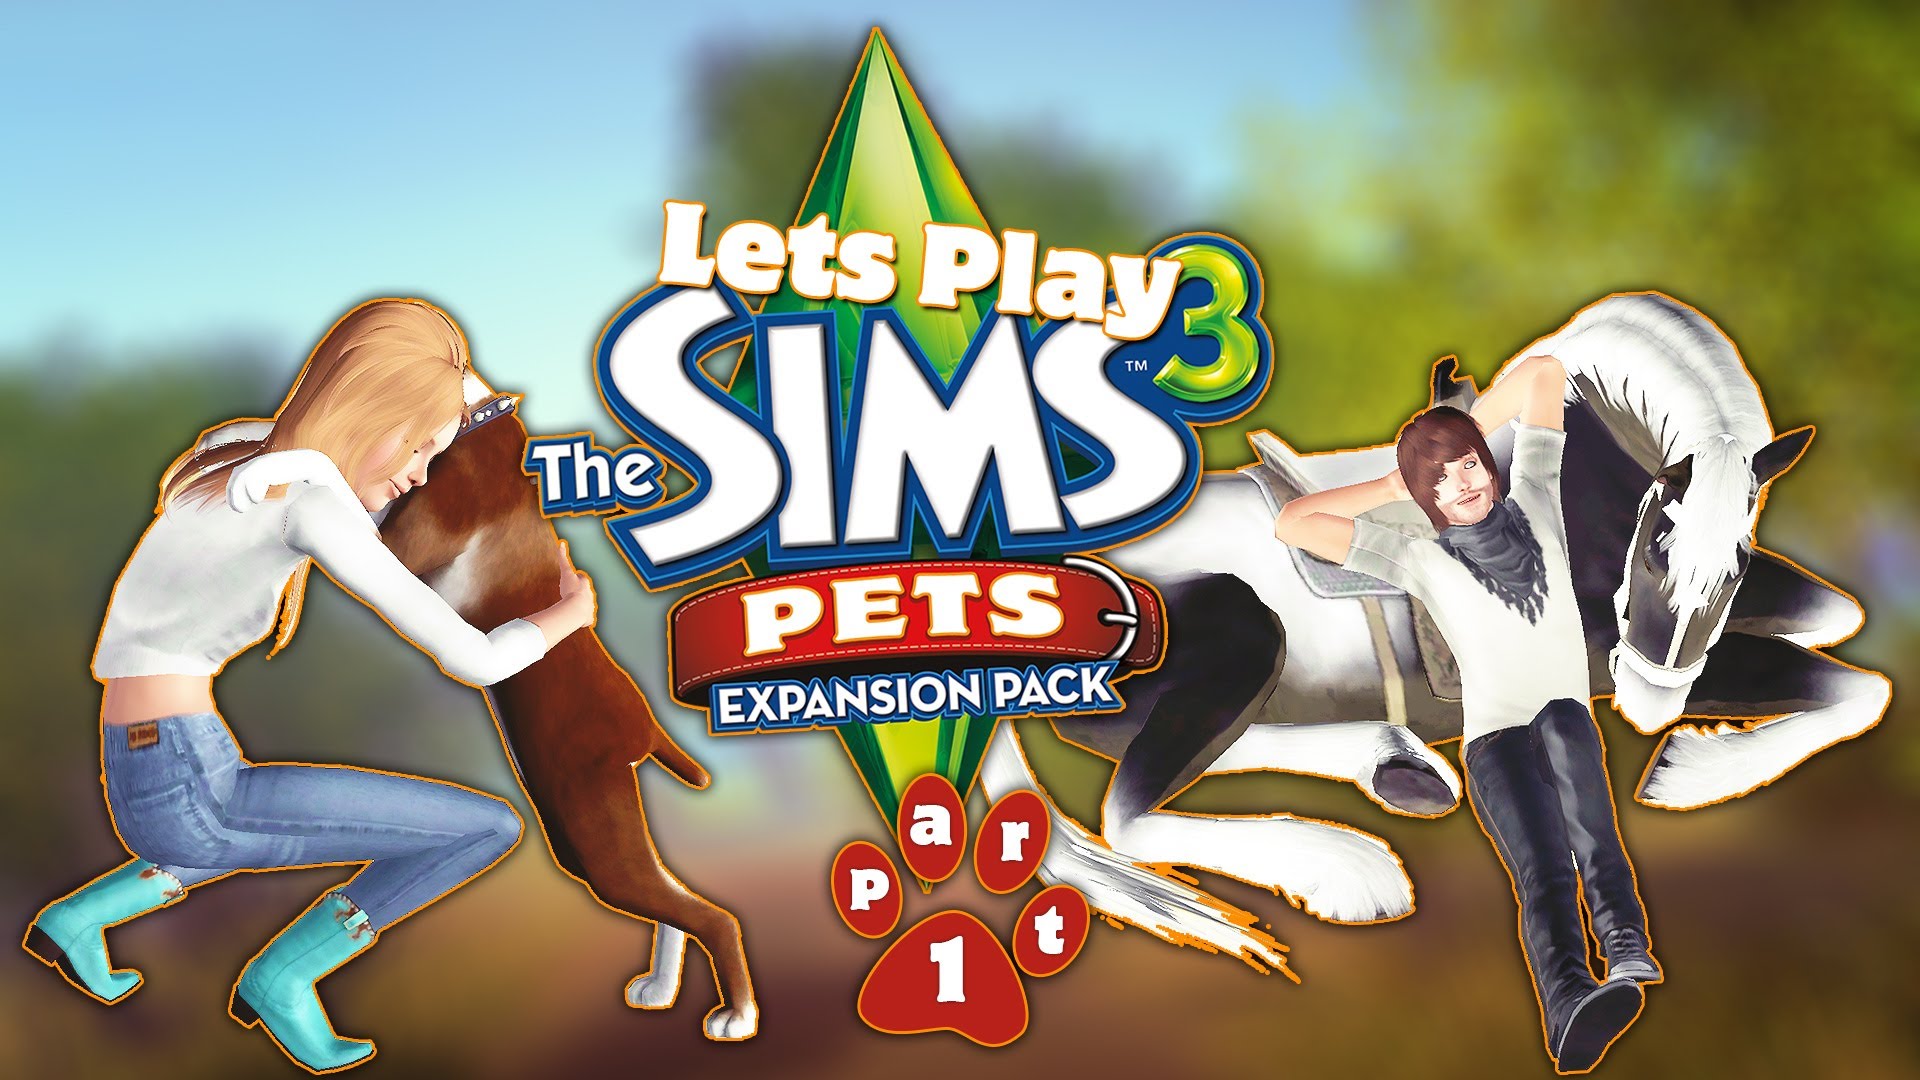 The Sims 3 Pets Pc Windows Free Download Full Game